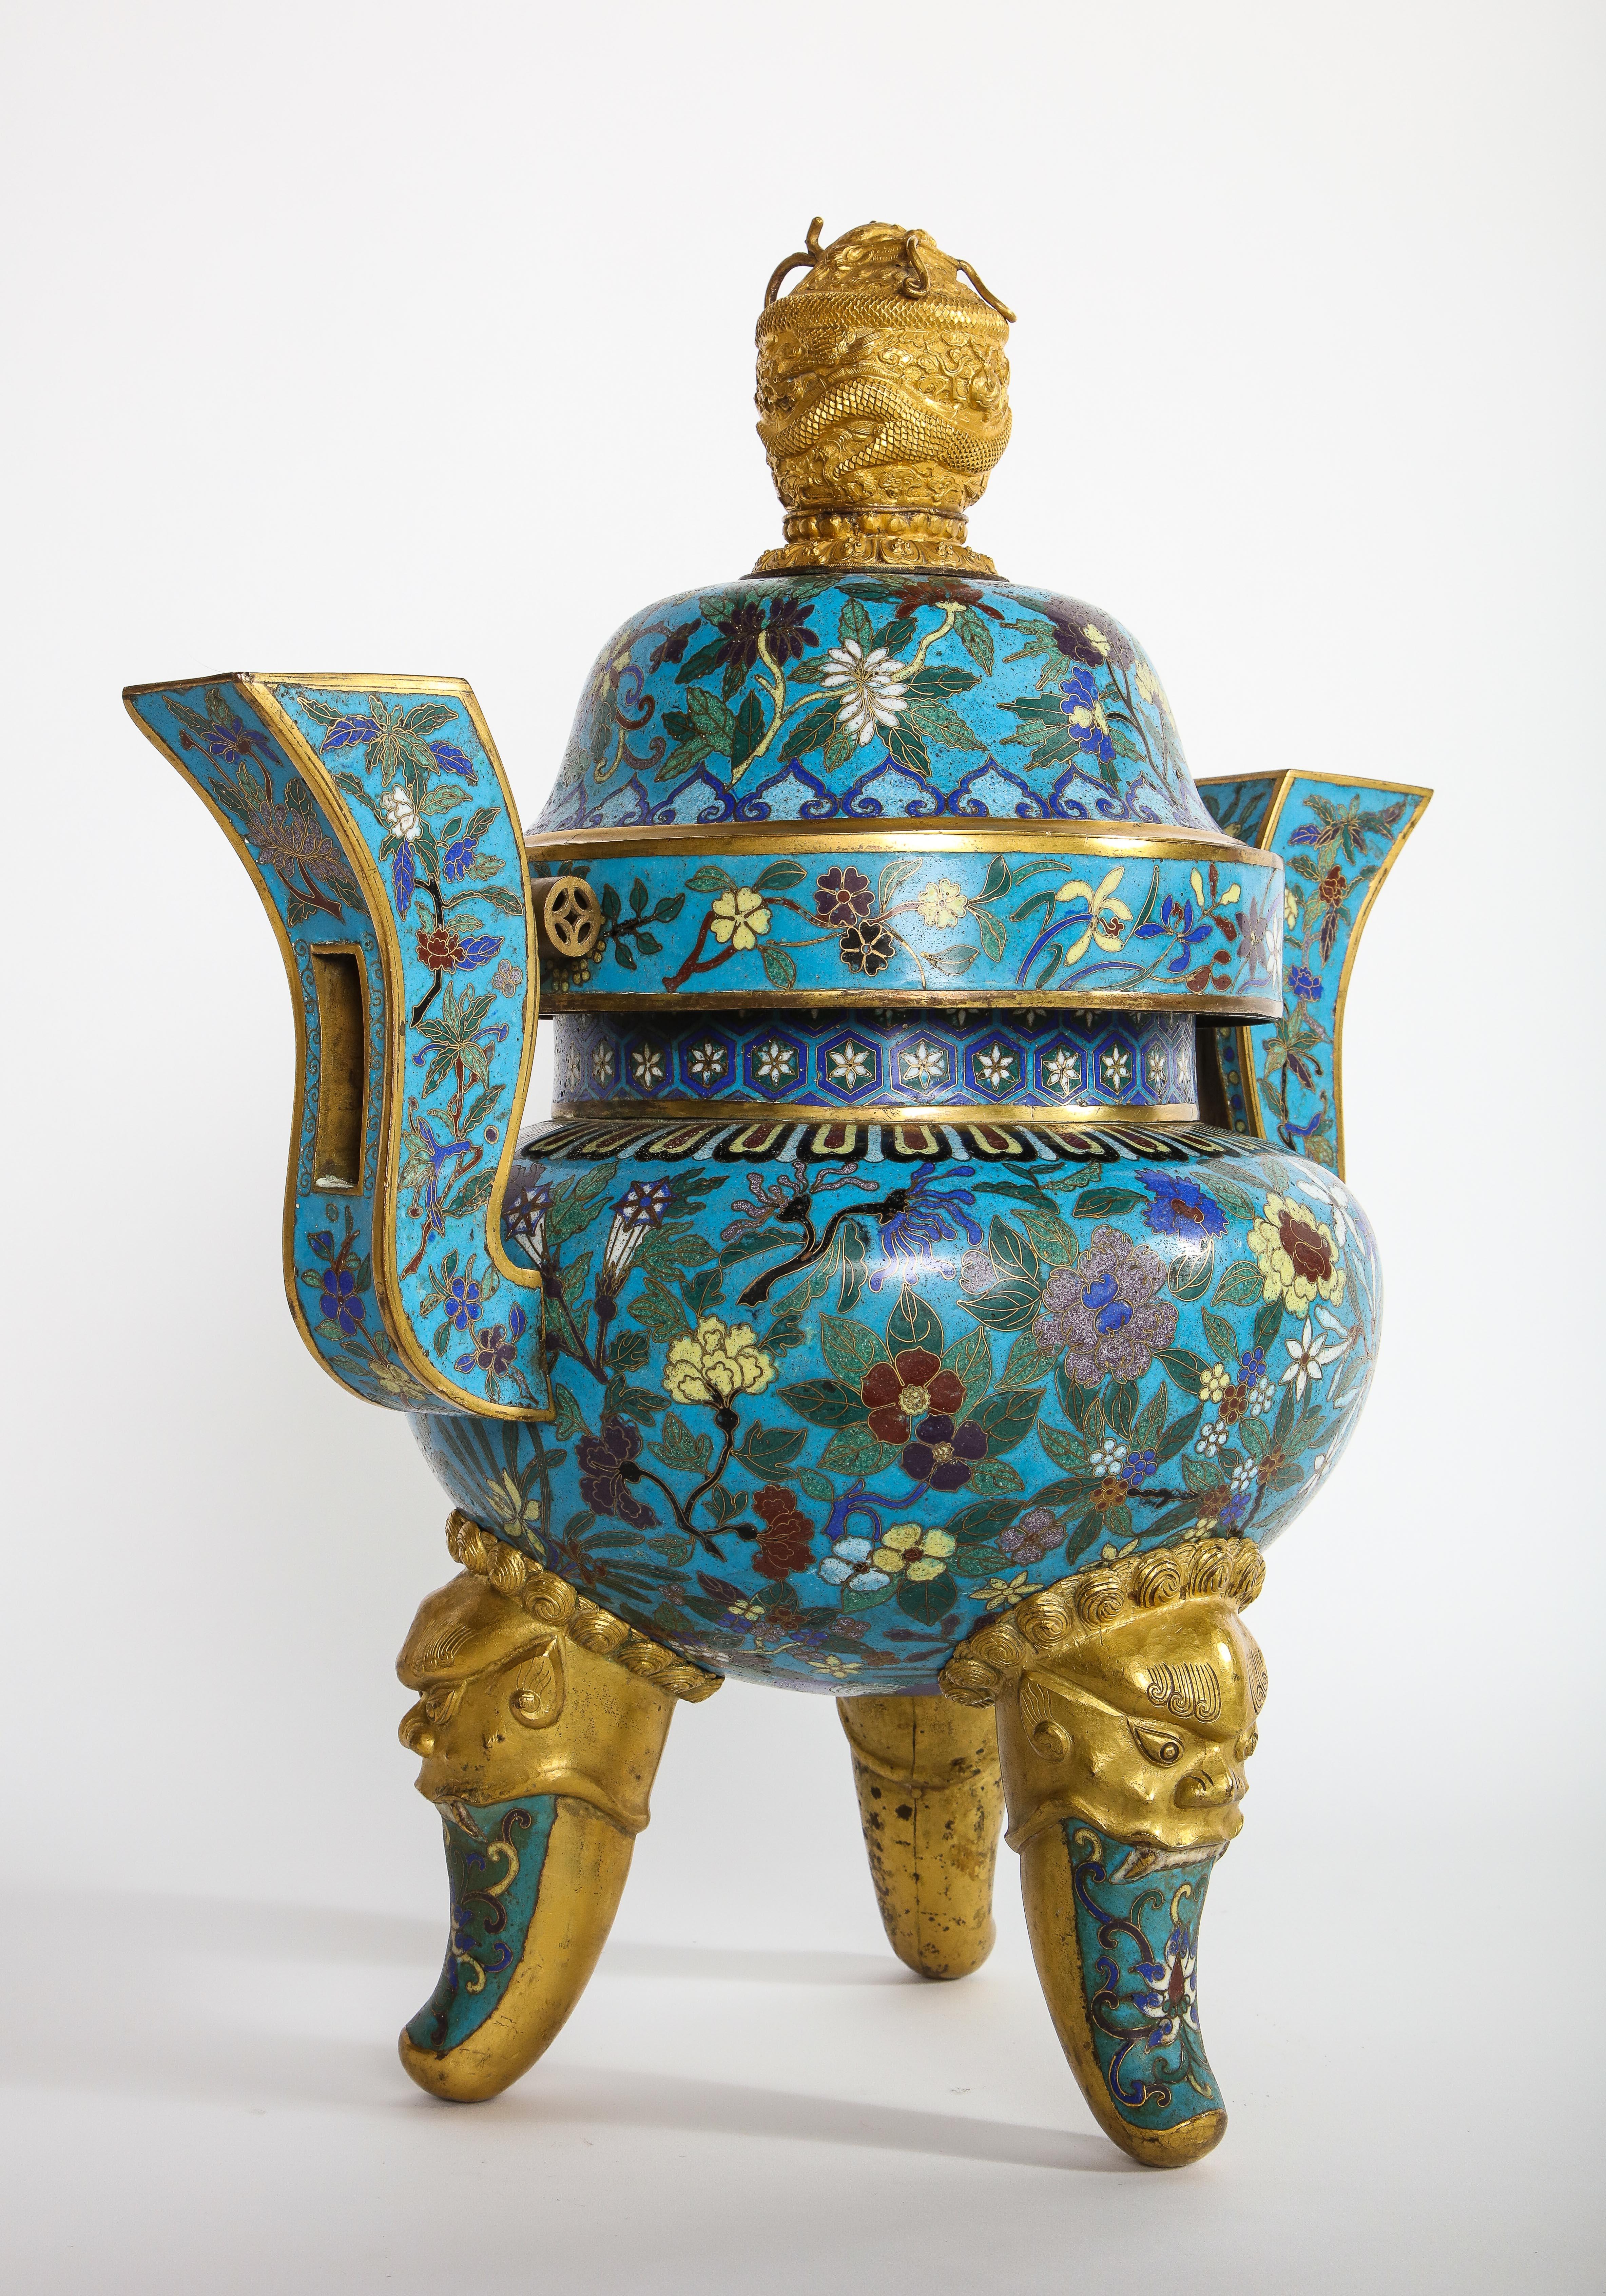 An exceptional antique Chinese cloisonné enamel tripod censor or planter and dragon finial cover. The compressed globular body raised on three cabriole legs issuing from gilt-bronze foo-dog masks and decorated with lotus scroll bearing blossoms